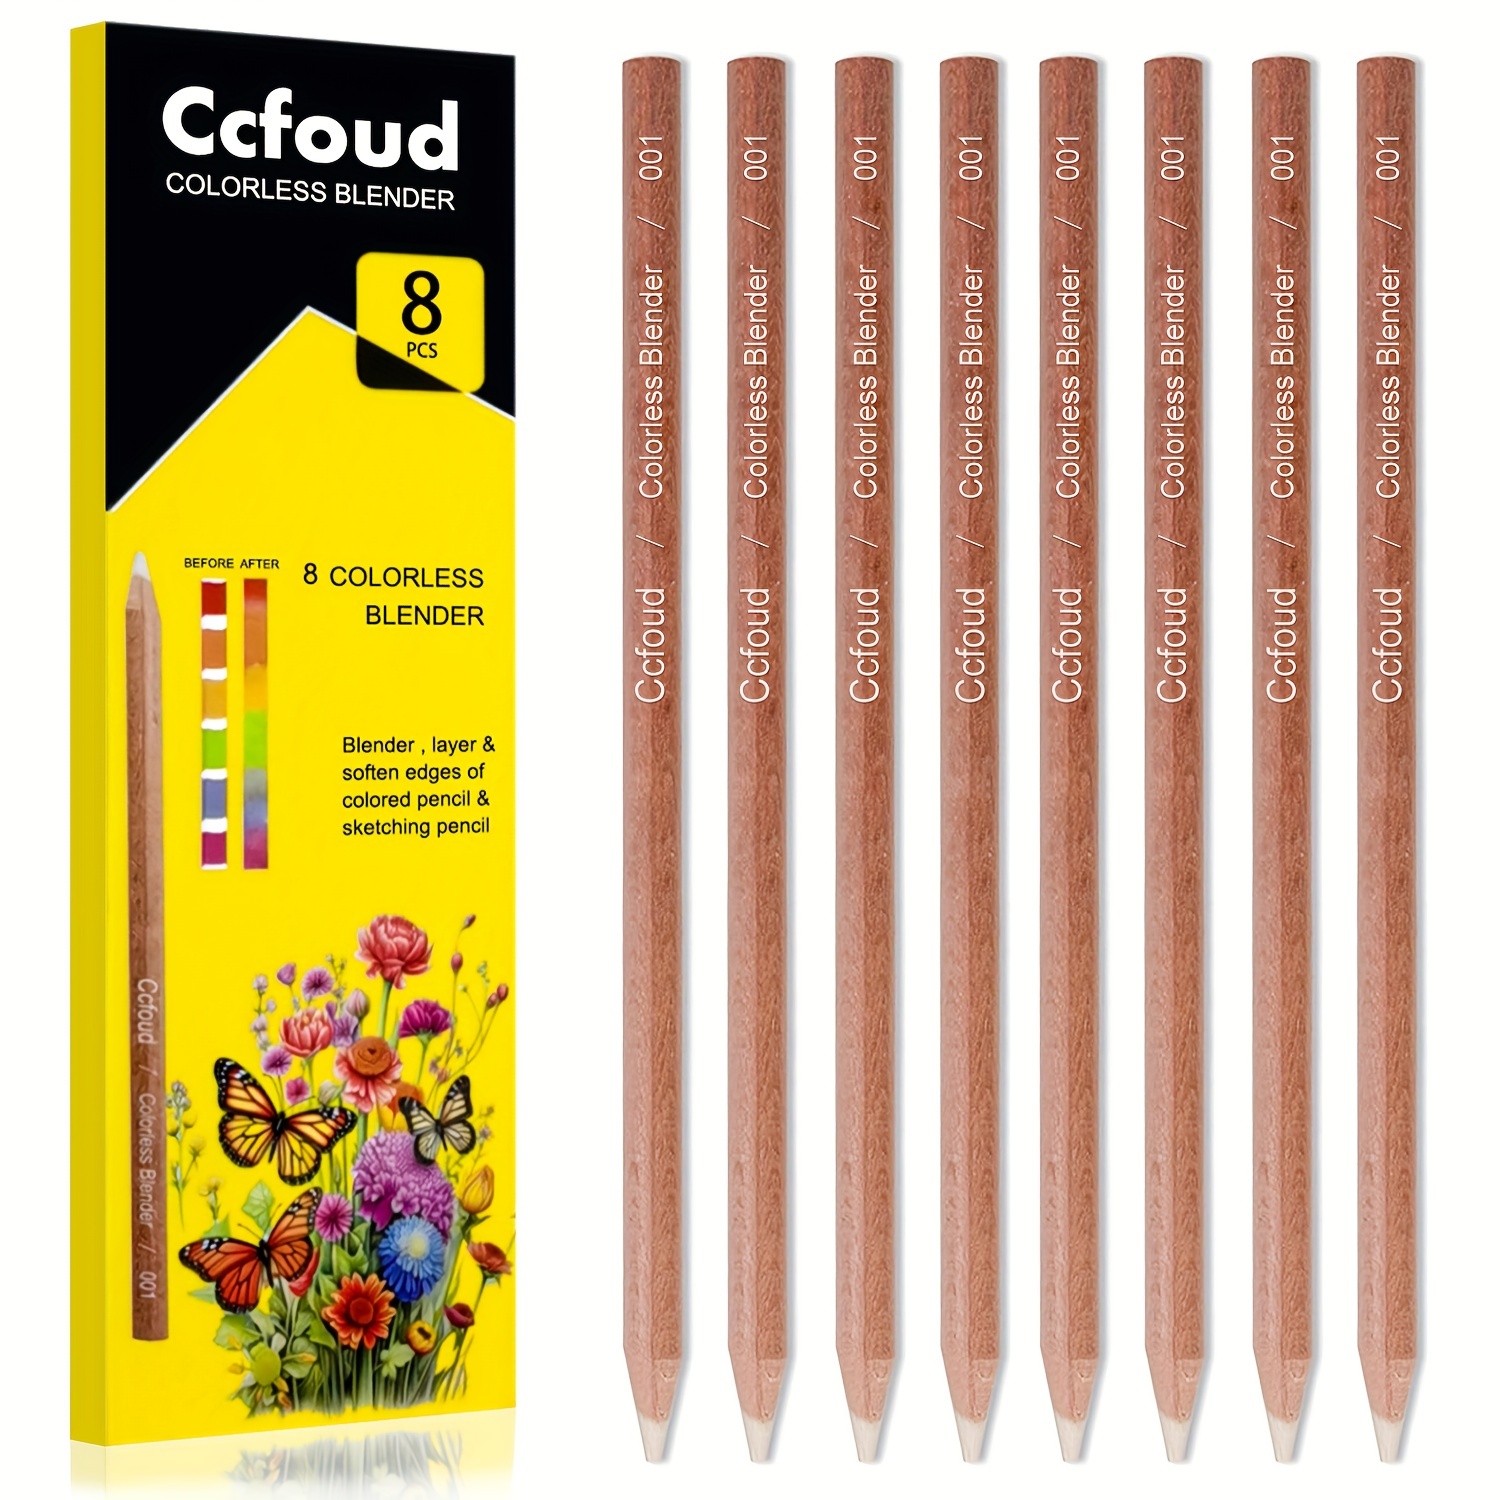 

Ccfoud Blender And Burnisher Pencils Set, Non-pigmented, Wax Based Pencil, Perfect For Blending Softening Edges, Ideal For Colored Pencils, Art Supplies For Artists Beginners (8 Pencils Total)